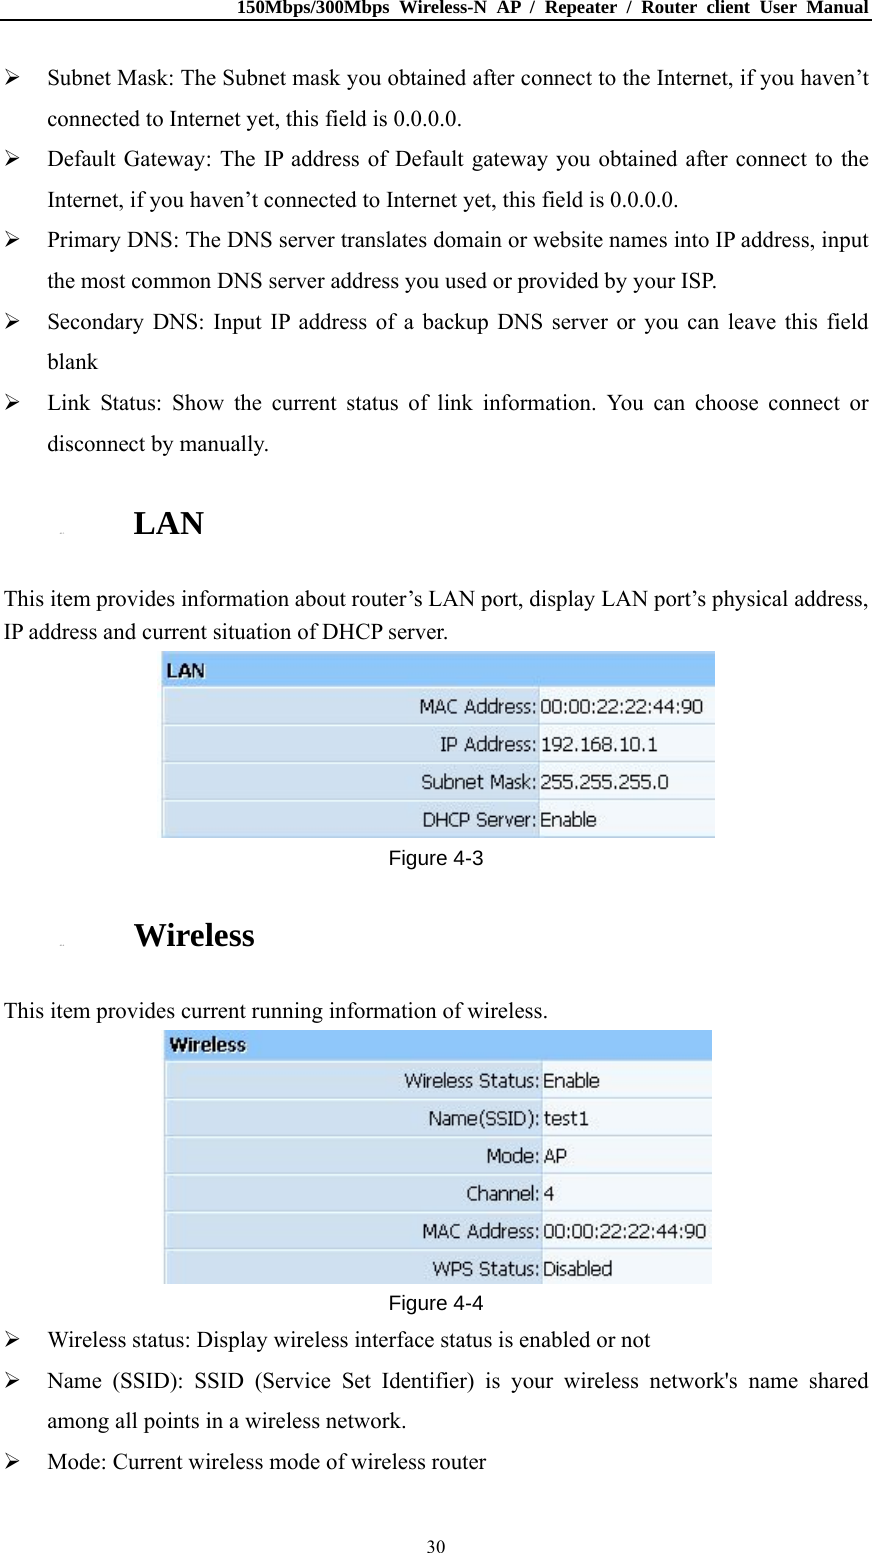 150Mbps/300Mbps Wireless-N AP / Repeater / Router client User Manual  30 Subnet Mask: The Subnet mask you obtained after connect to the Internet, if you haven’t connected to Internet yet, this field is 0.0.0.0.  Default Gateway: The IP address of Default gateway you obtained after connect to the Internet, if you haven’t connected to Internet yet, this field is 0.0.0.0.  Primary DNS: The DNS server translates domain or website names into IP address, input the most common DNS server address you used or provided by your ISP.  Secondary DNS: Input IP address of a backup DNS server or you can leave this field blank  Link Status: Show the current status of link information. You can choose connect or disconnect by manually. 4.1.3. LAN This item provides information about router’s LAN port, display LAN port’s physical address, IP address and current situation of DHCP server.  Figure 4-3 4.1.4. Wireless This item provides current running information of wireless.  Figure 4-4  Wireless status: Display wireless interface status is enabled or not  Name (SSID): SSID (Service Set Identifier) is your wireless network&apos;s name shared among all points in a wireless network.  Mode: Current wireless mode of wireless router   